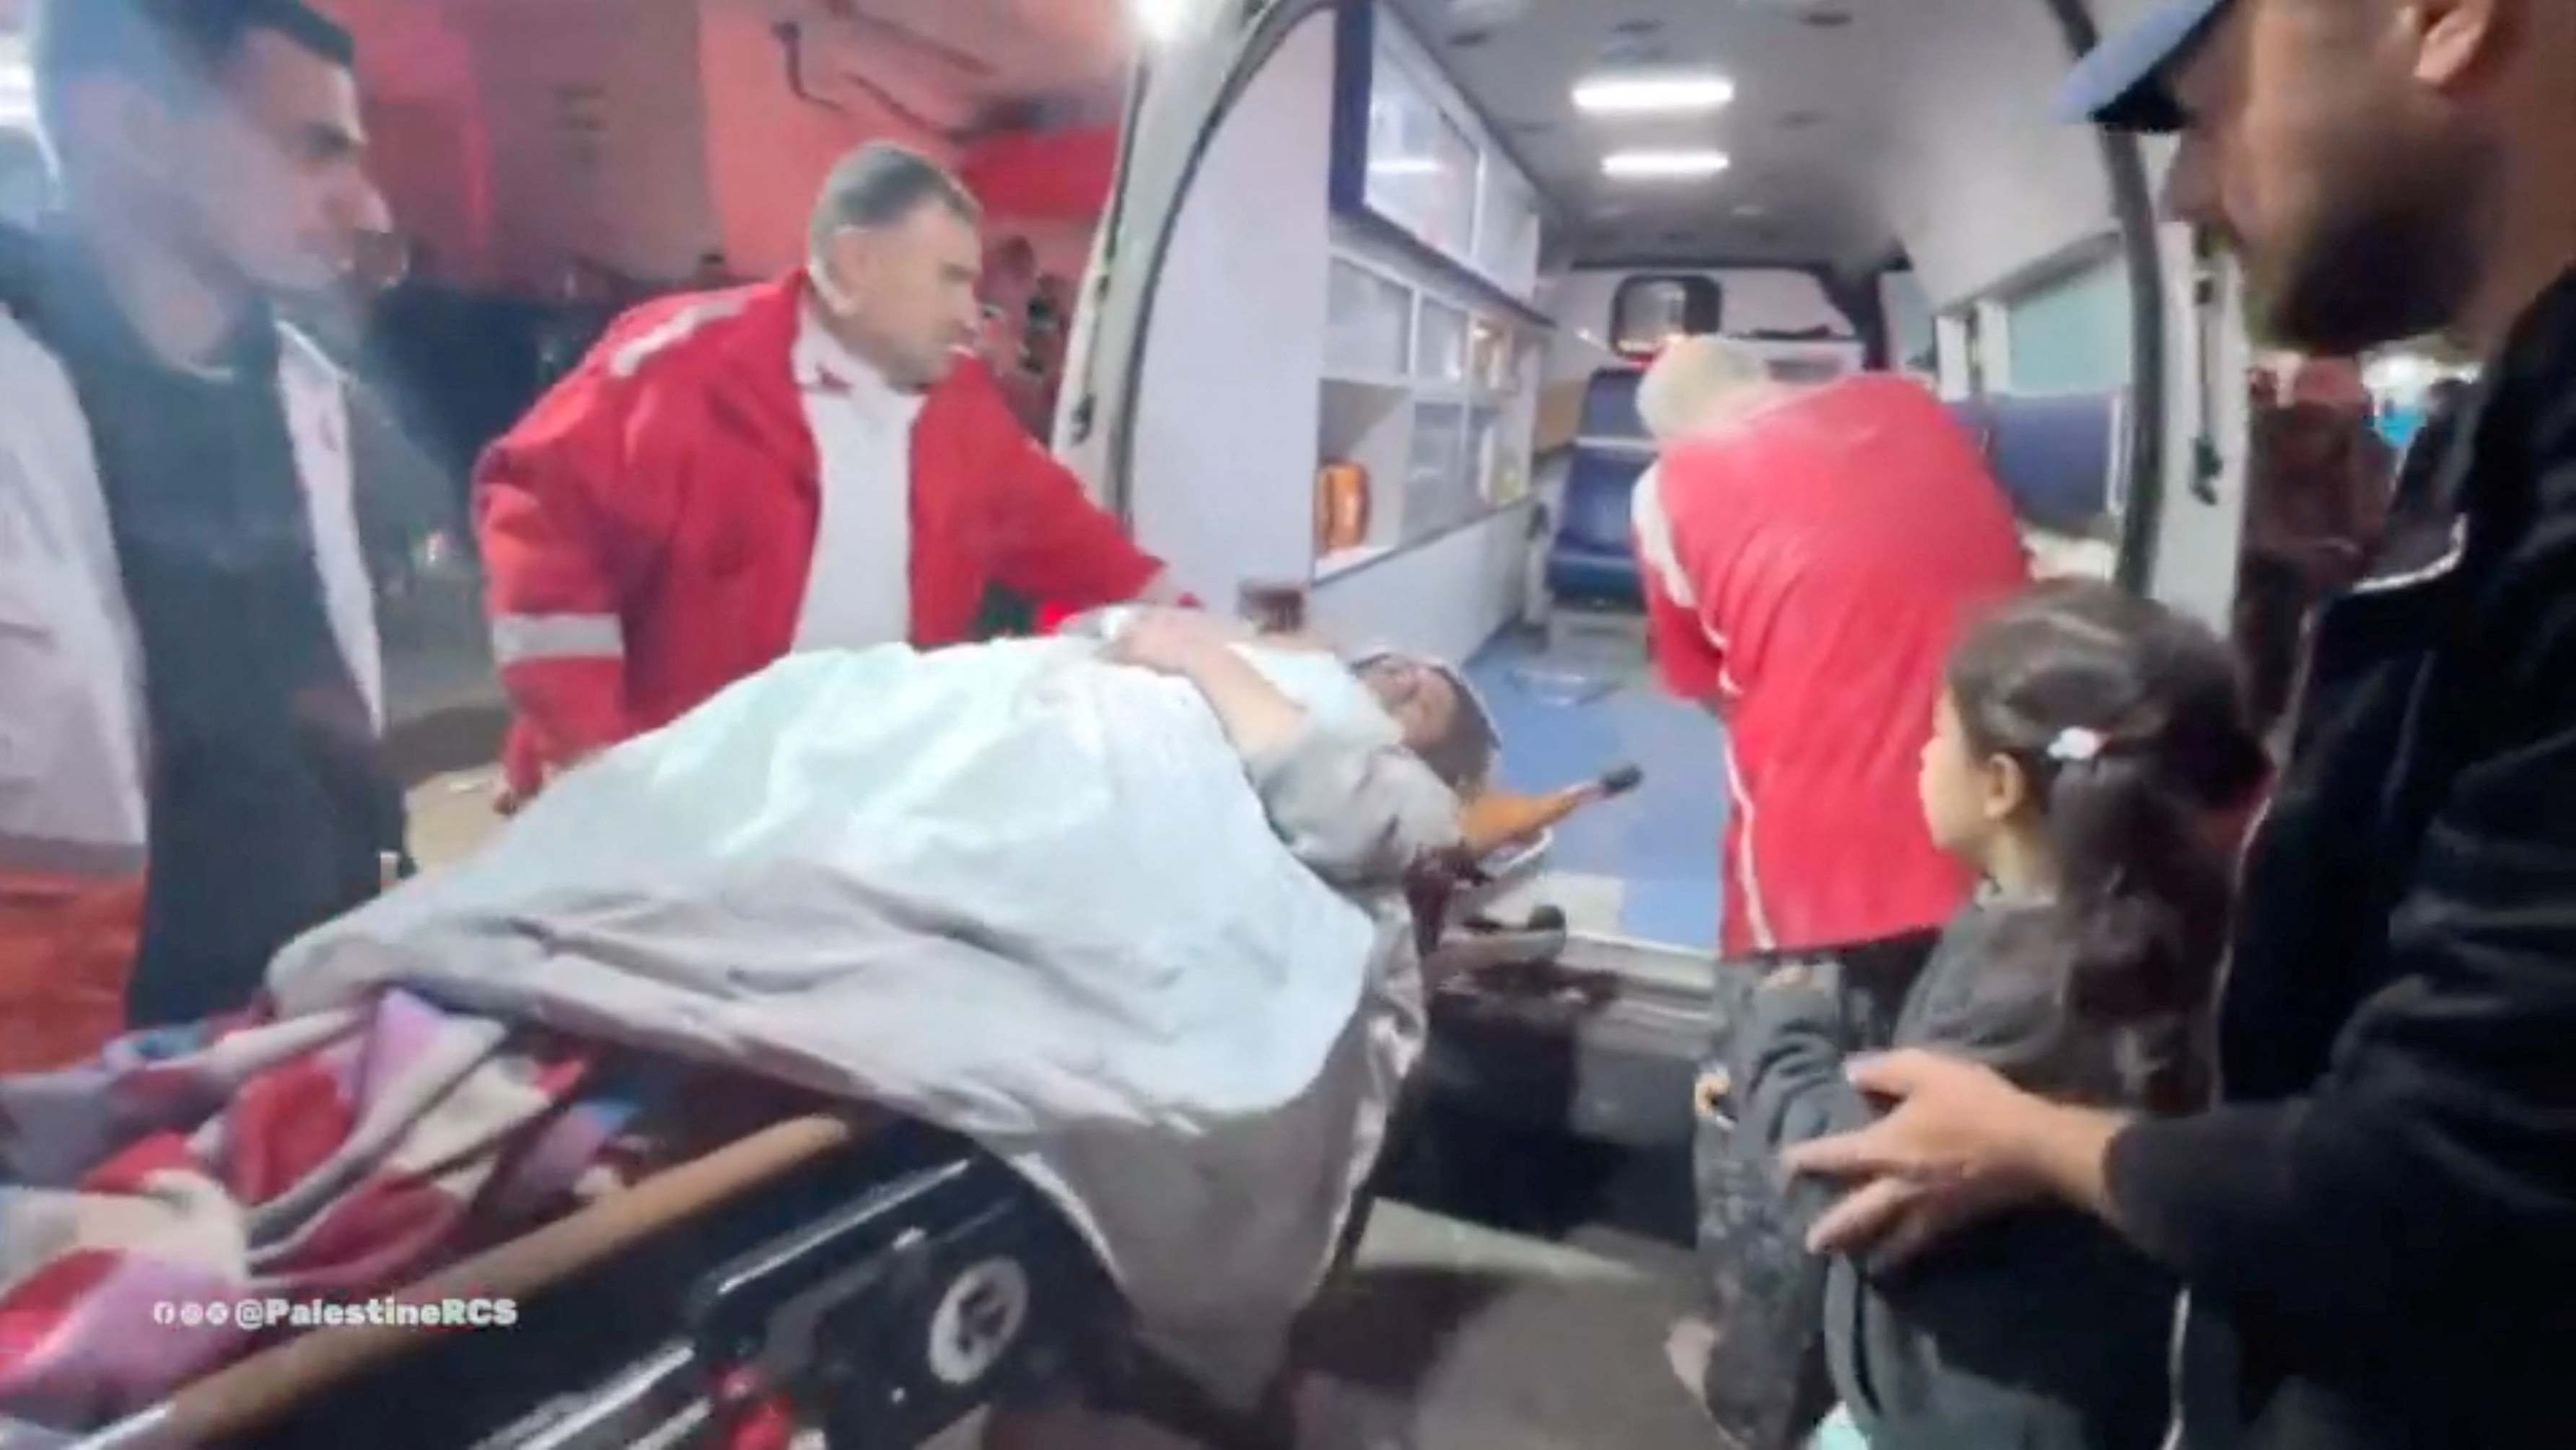 Exhausted Gaza medics struggle to help casualties from Israeli bombardment  | Reuters